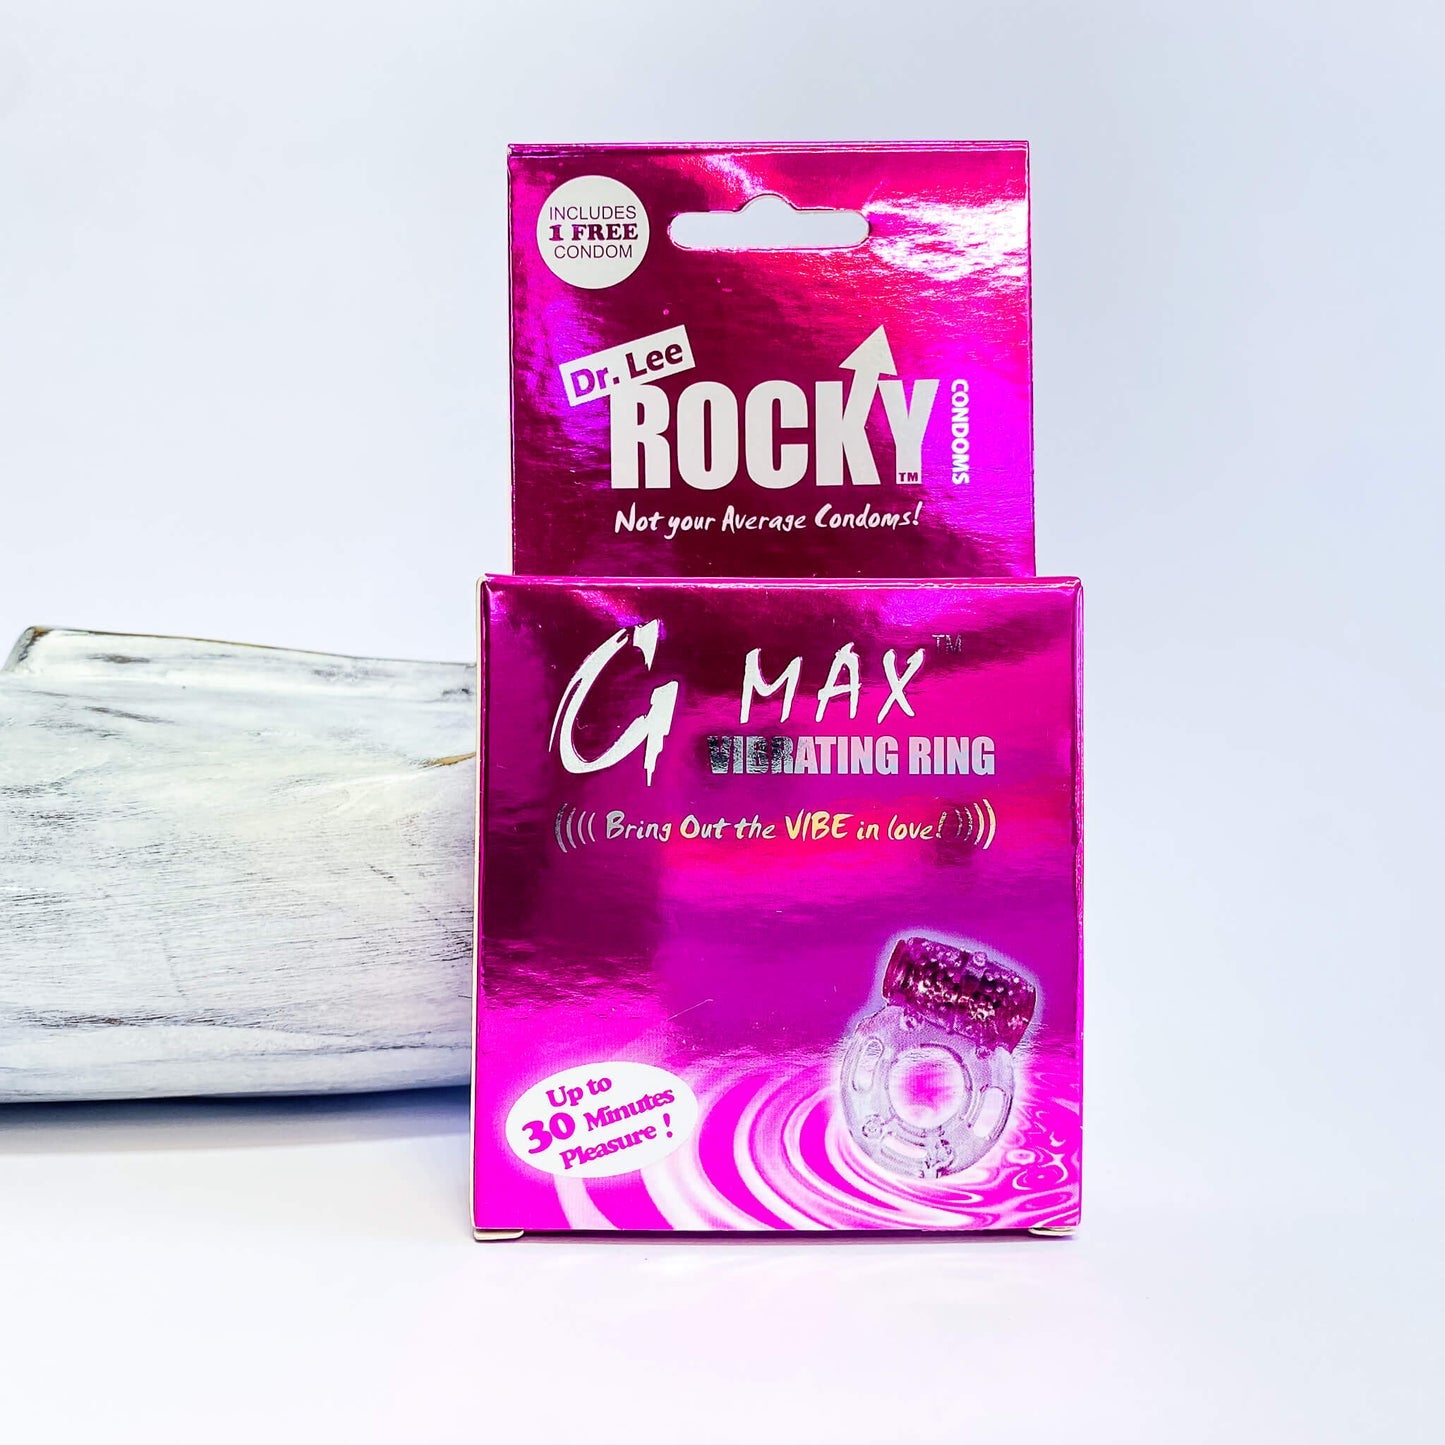 G Max Vibrating Ring (FREE condom included)